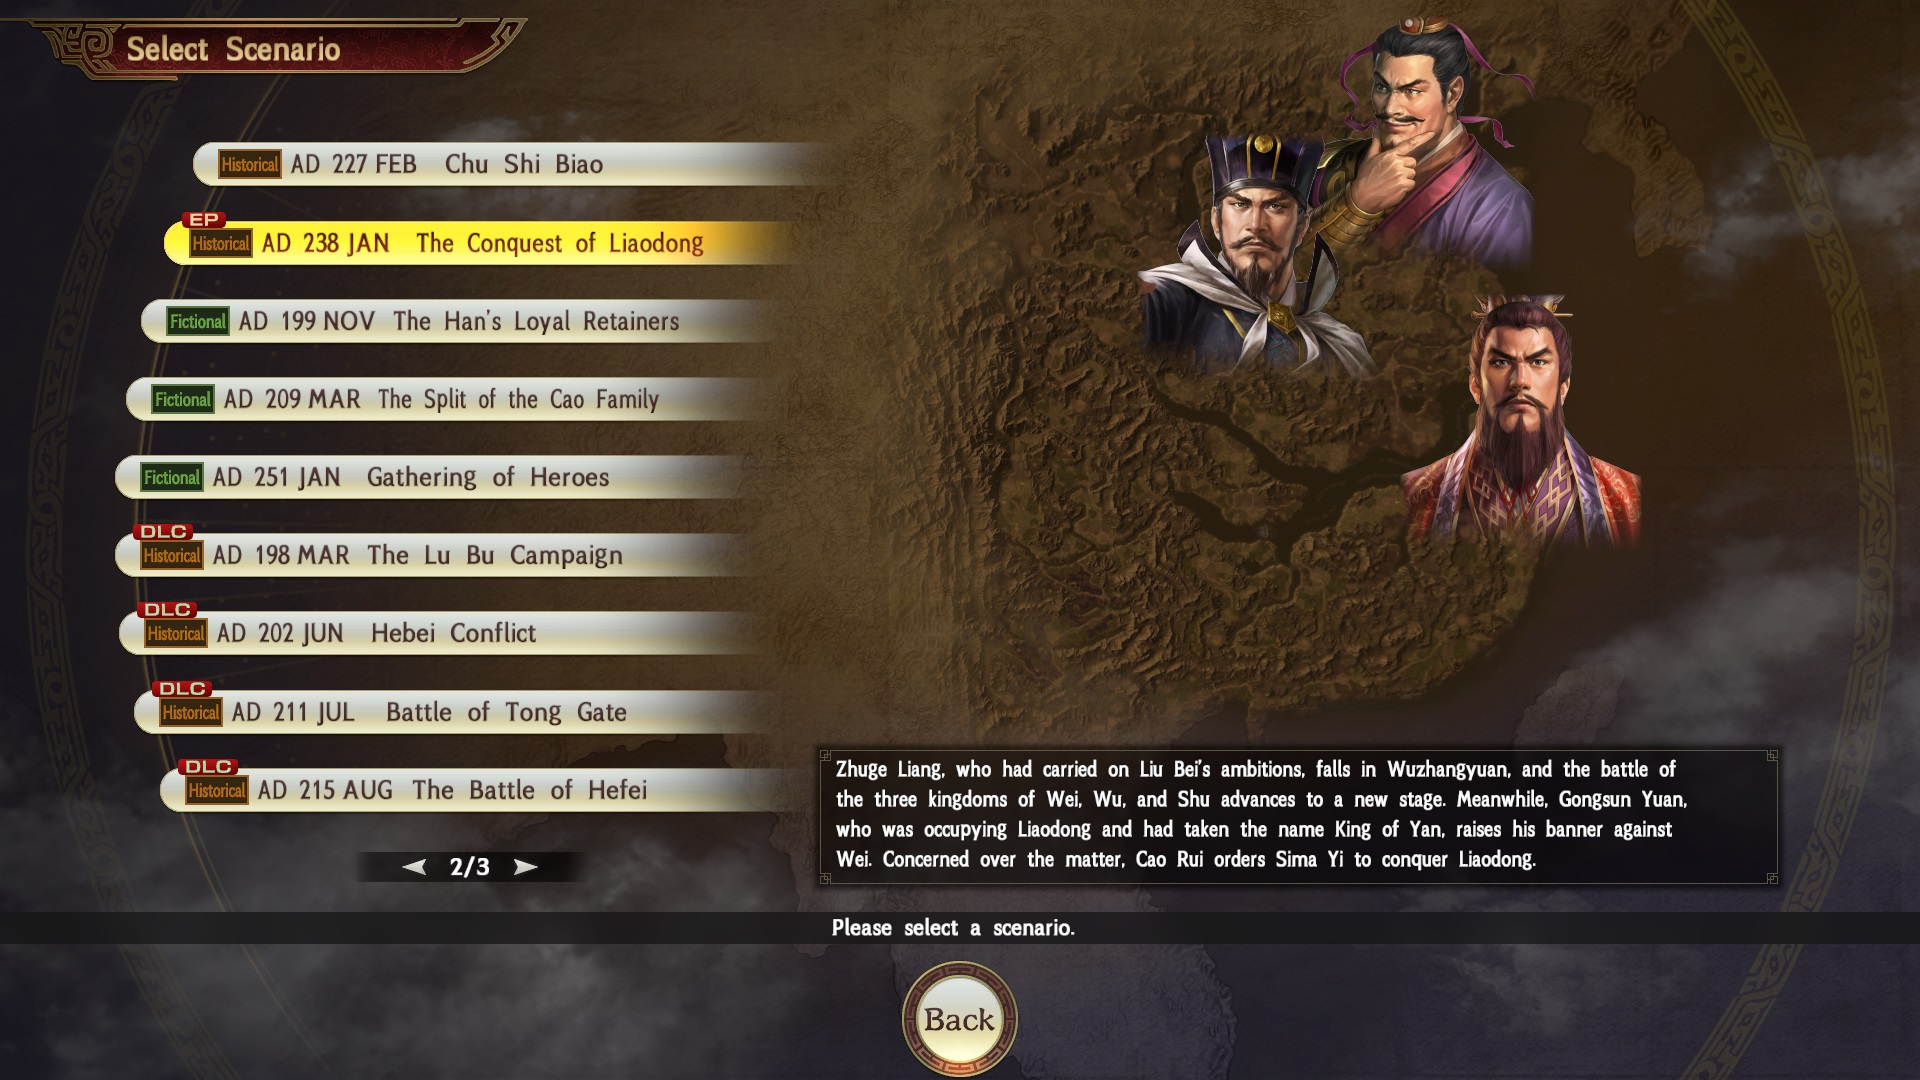 Romance Of The Three Kingdoms Xiv Diplomacy And Strategy Expansion Pack Details And Screenshots Scenarios Event Editor Officer Characteristics Nintendo Everything